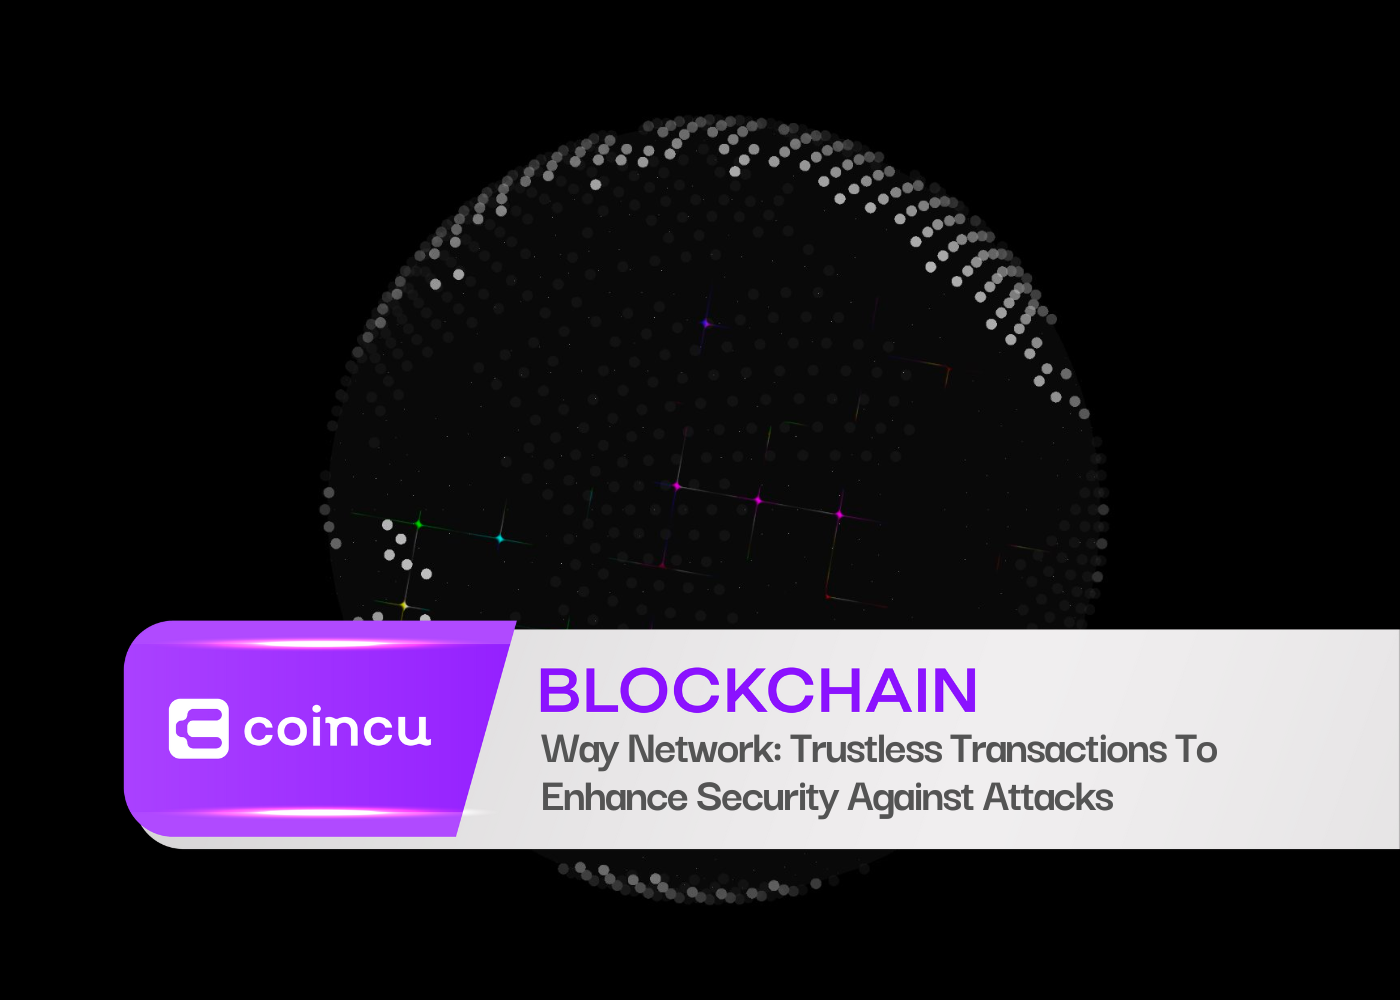 Way Network: Trustless Transactions To Enhance Security Against Attacks